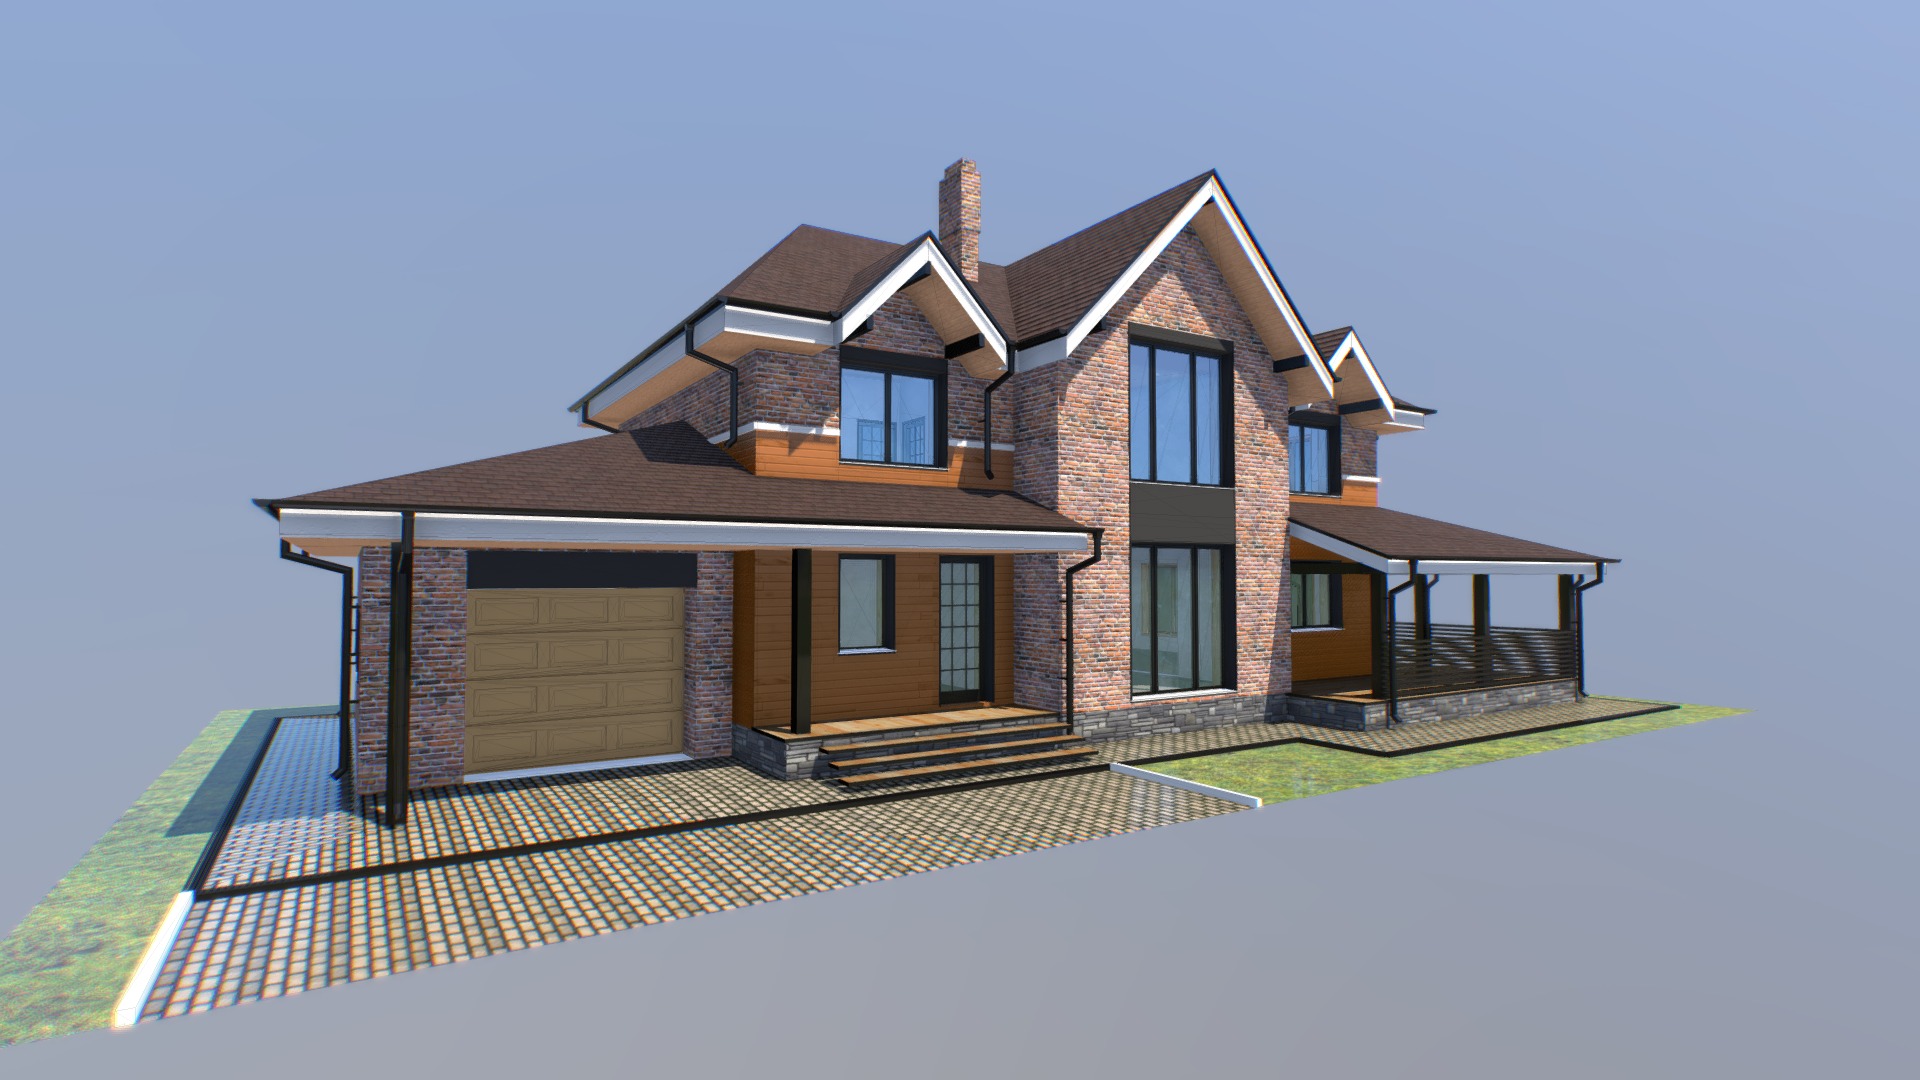 3D model Residential house 2020 Updated 01/2020 - This is a 3D model of the Residential house 2020 Updated 01/2020. The 3D model is about a house with a driveway.